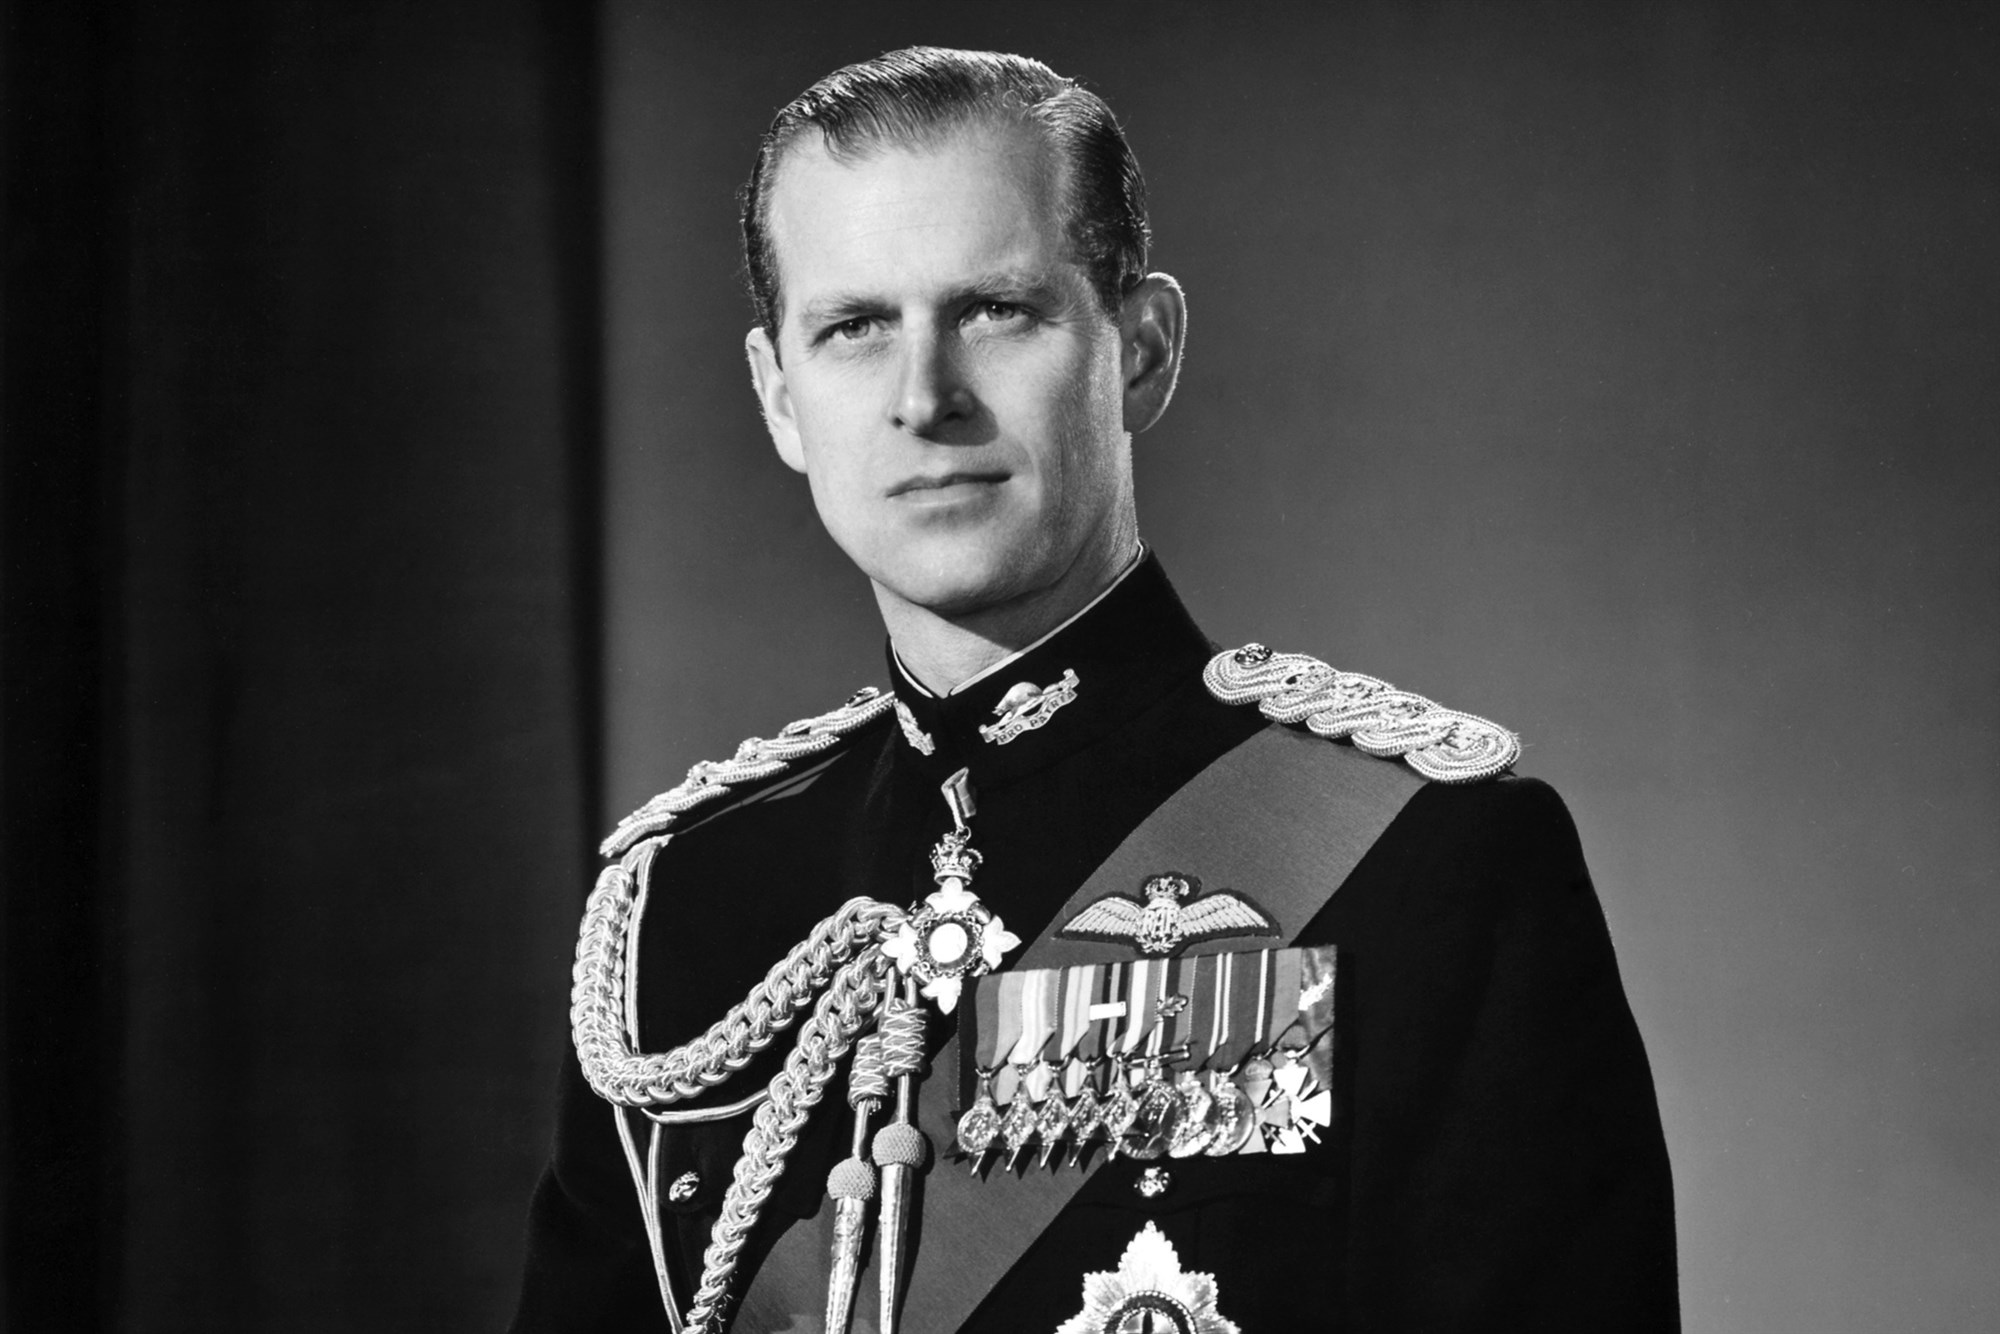 Prince Philip, Duke of Edinburgh poses for a portrait at home in Buckingham Palace in December 1958 in London.Donald McKague / Michael Ochs Archives/Getty Images